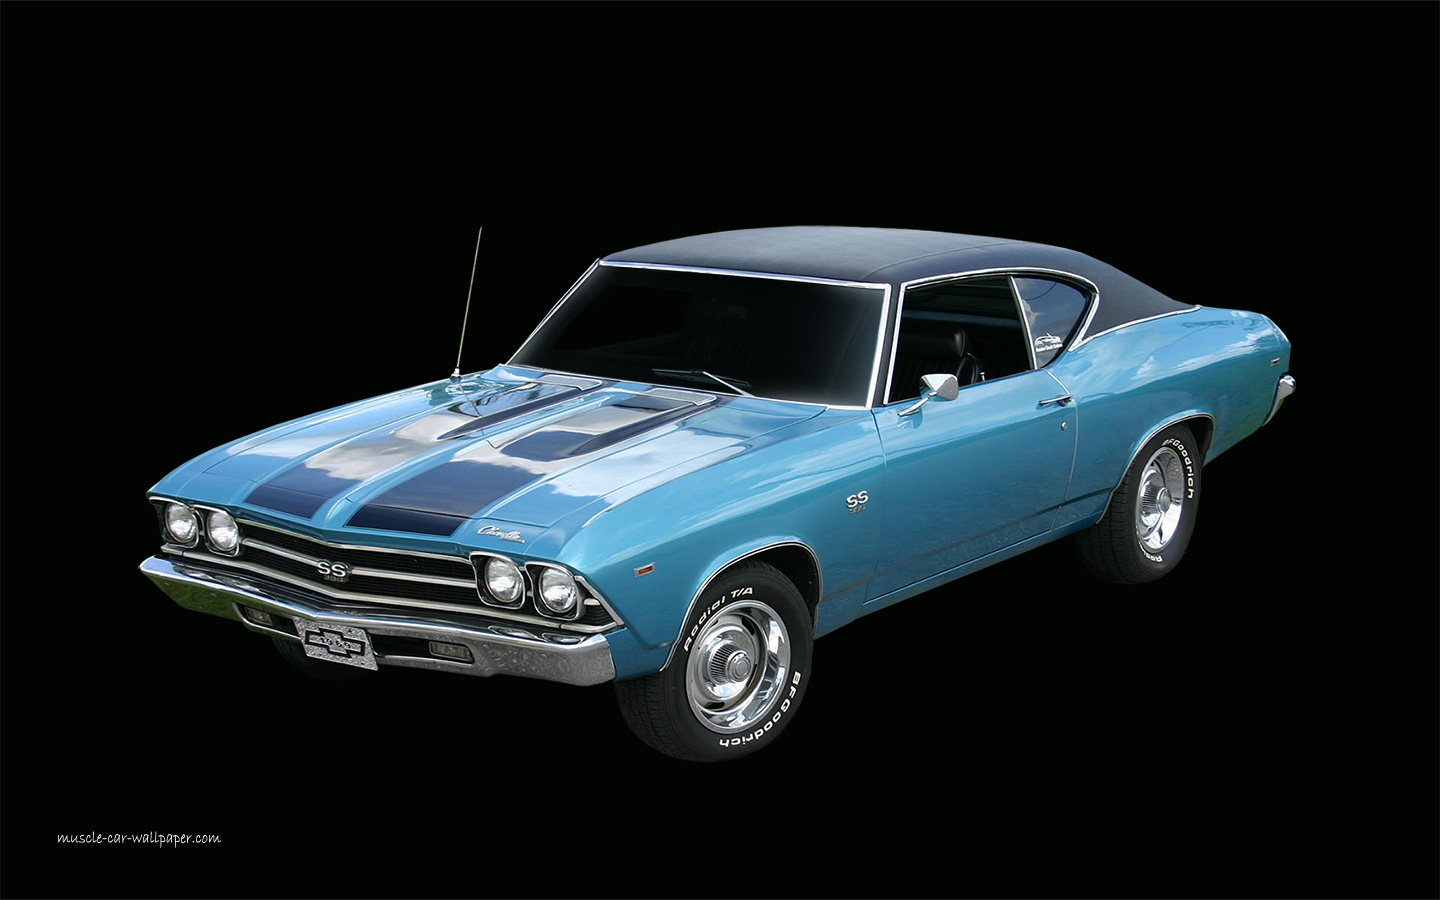 Chevelle SS Wallpaper Pictures 1969 Muscle Car Wallpaper 1440 01 1440x900